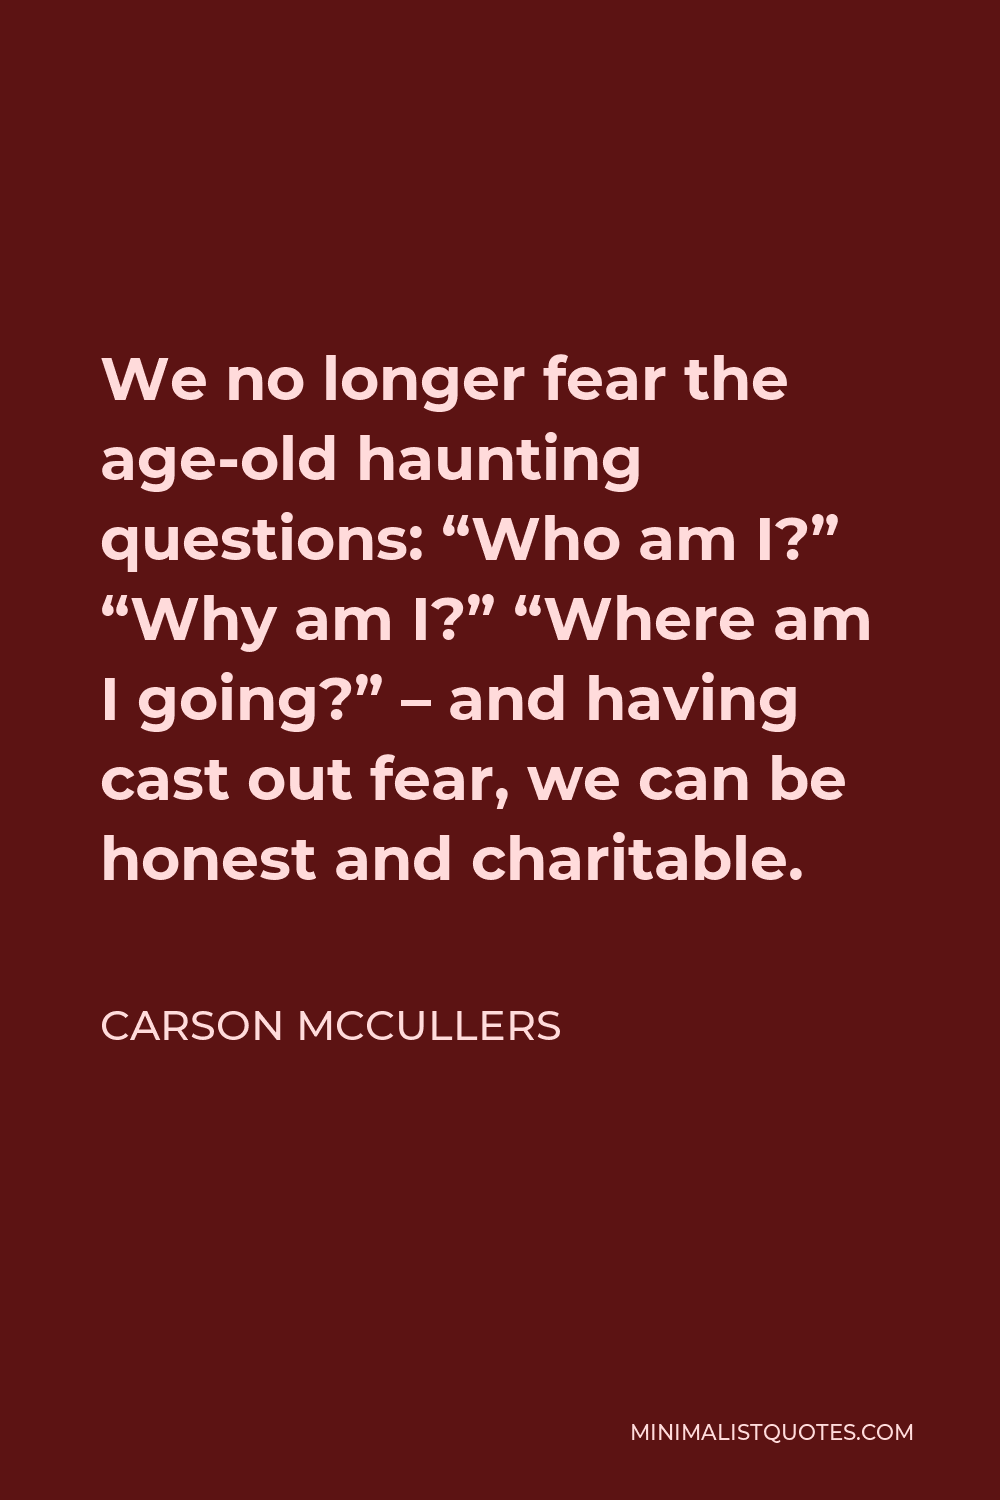 Carson McCullers Quote - We no longer fear the age-old haunting questions: “Who am I?” “Why am I?” “Where am I going?” – and having cast out fear, we can be honest and charitable.